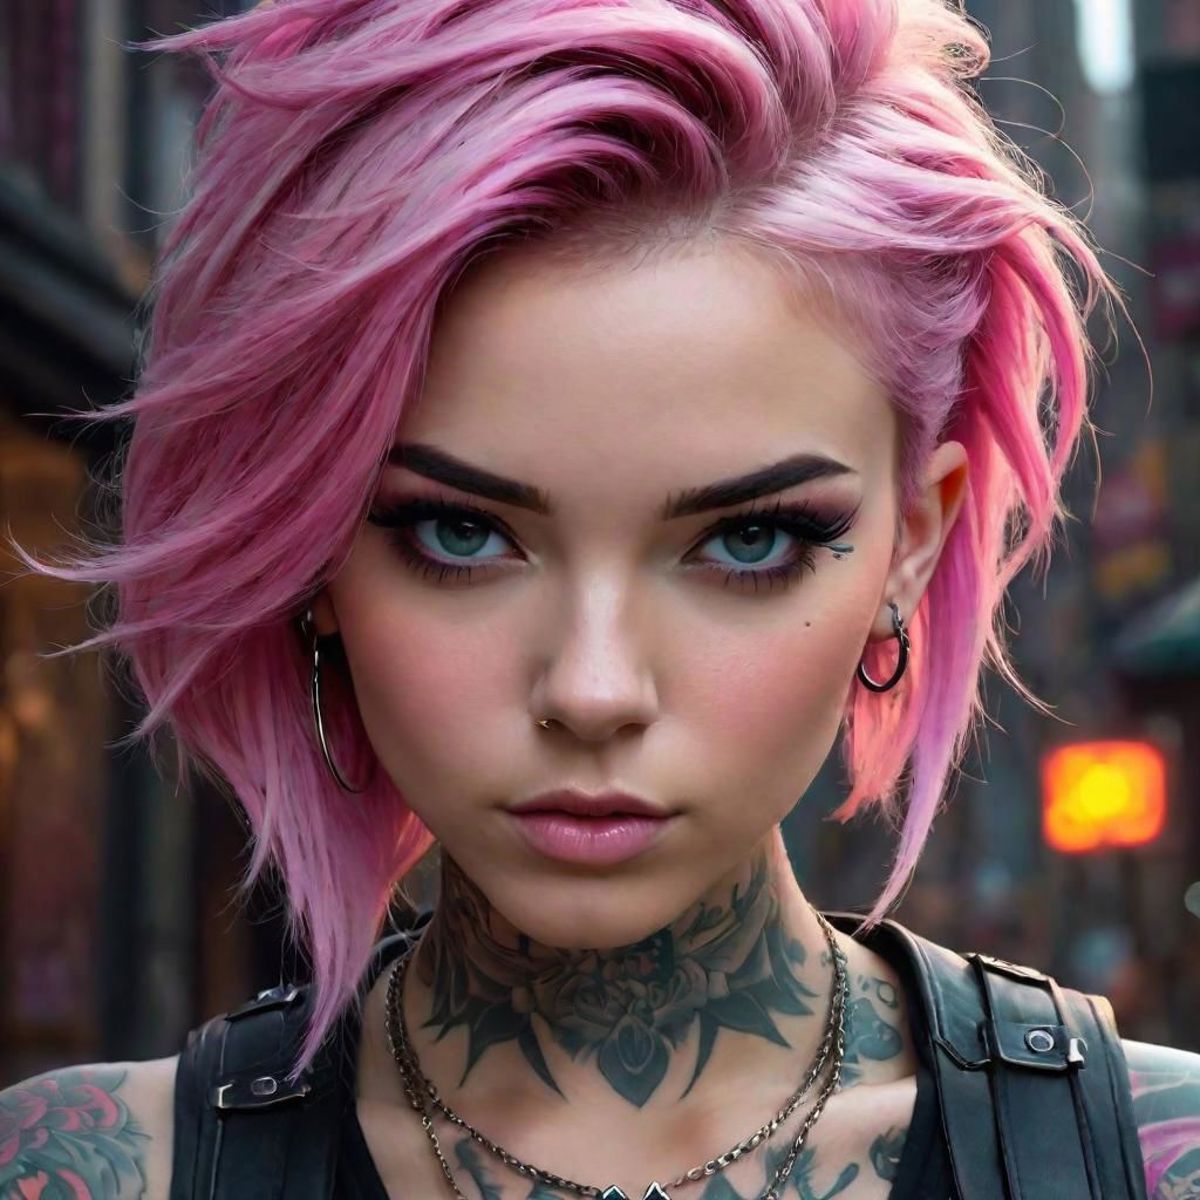 A young woman with pink hair, tattoos, and piercings wearing a black leather jacket and a necklace.